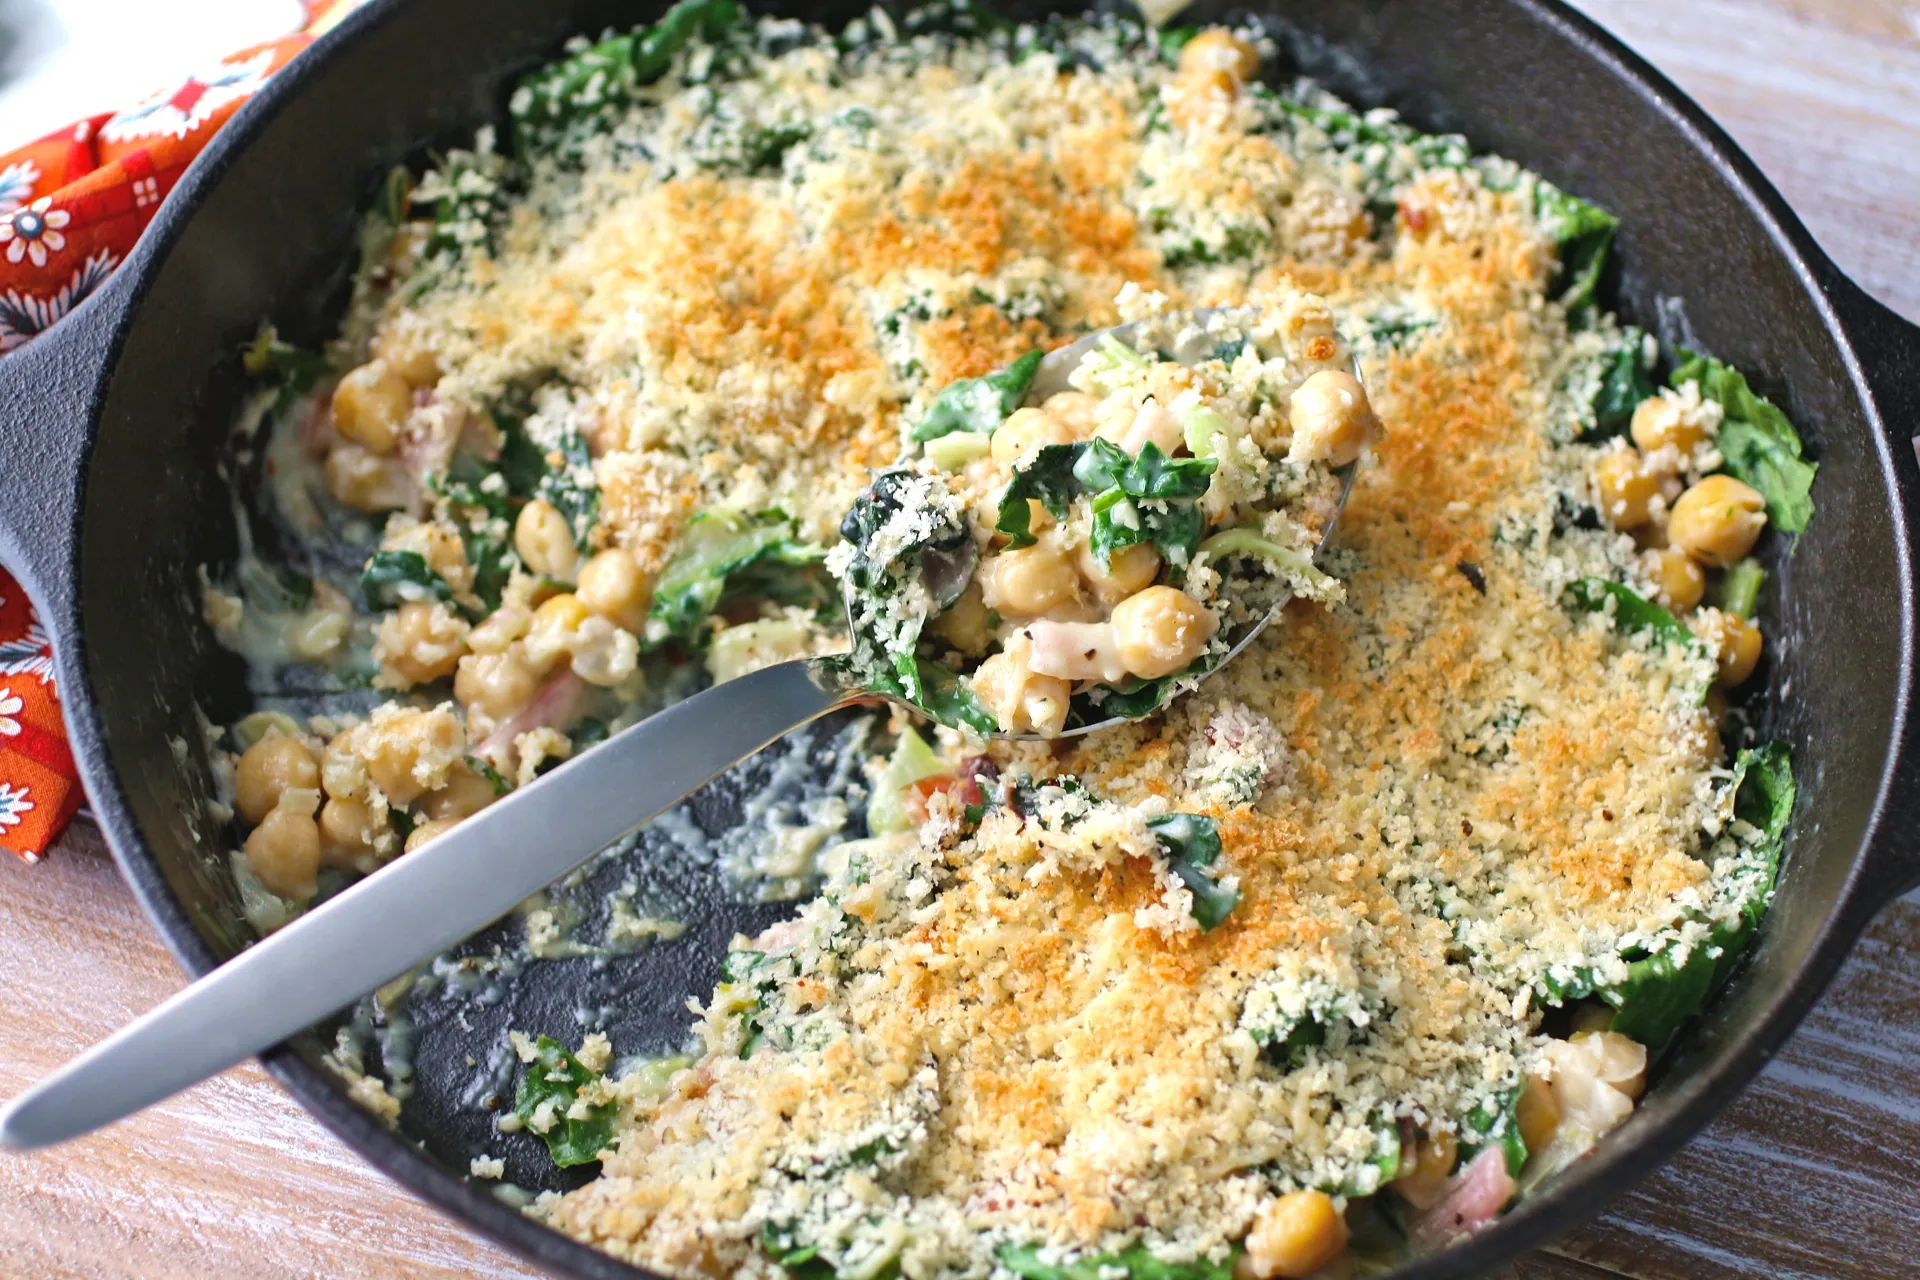 Creamy Skillet Swiss Chard and Chickpeas with Crunchy Breadcrumbs is a tasty vegetarian dish. You'll love Creamy Skillet Swiss Chard and Chickpeas with Crunchy Breadcrumbs!